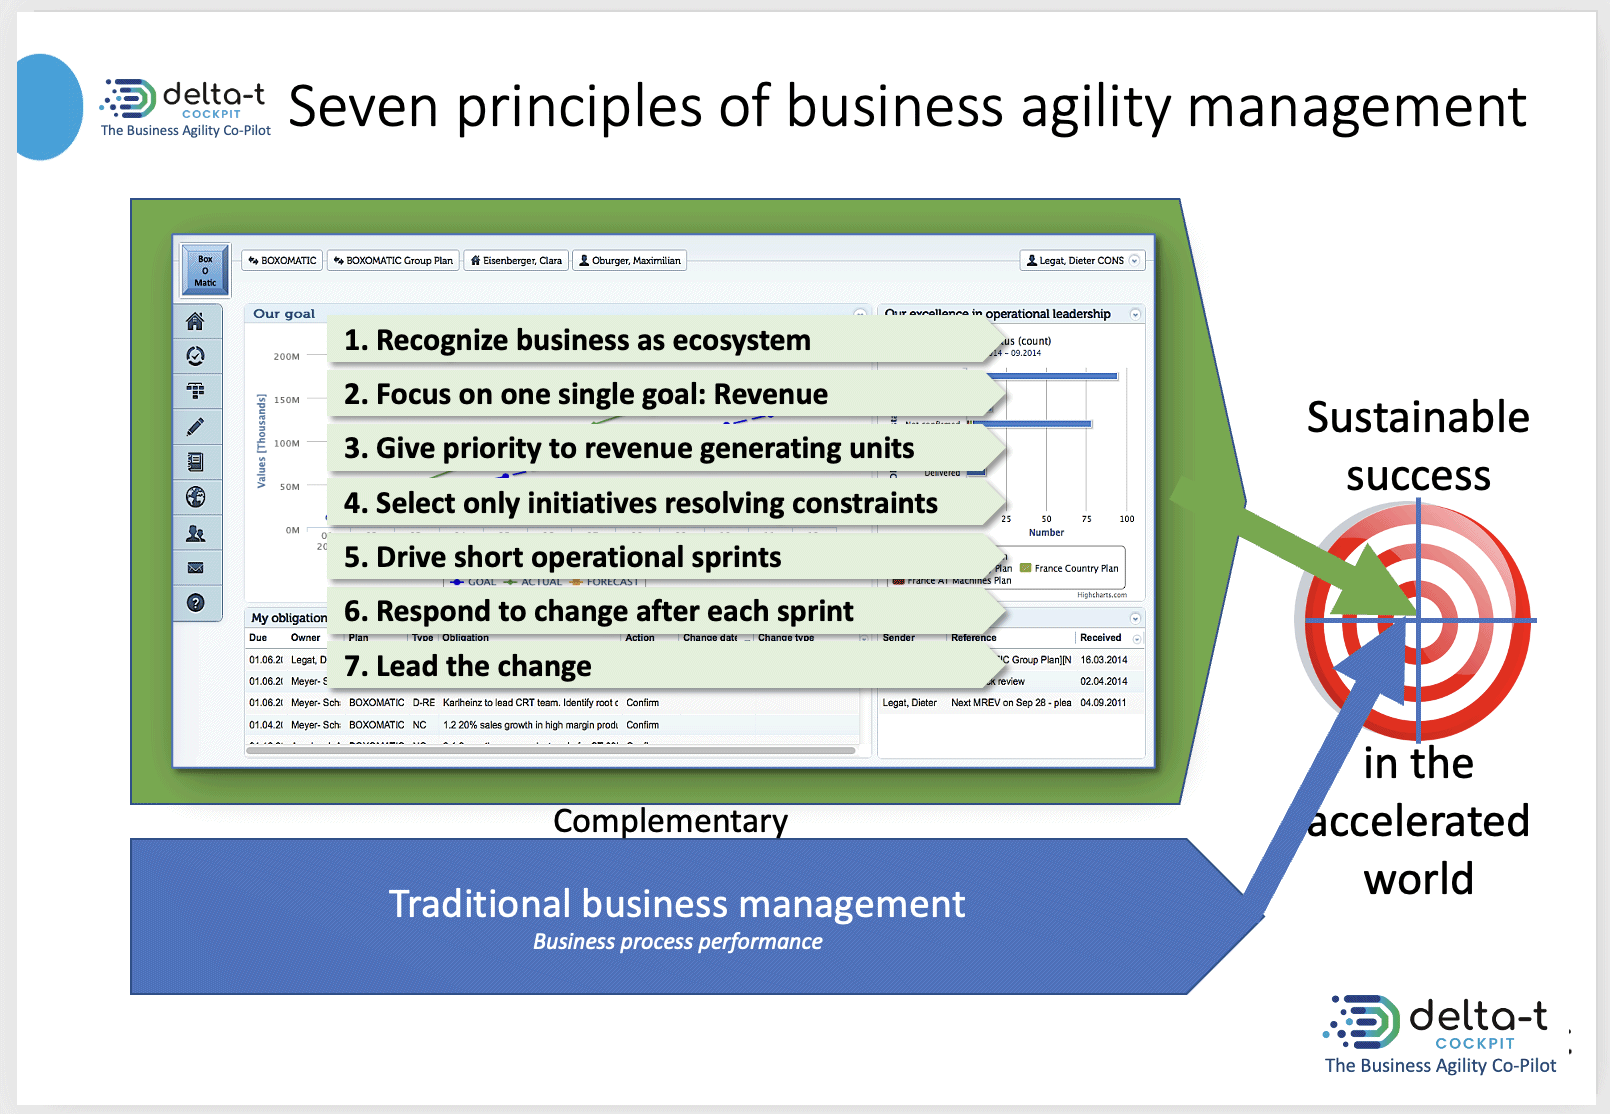 Sevent principles of business agility management